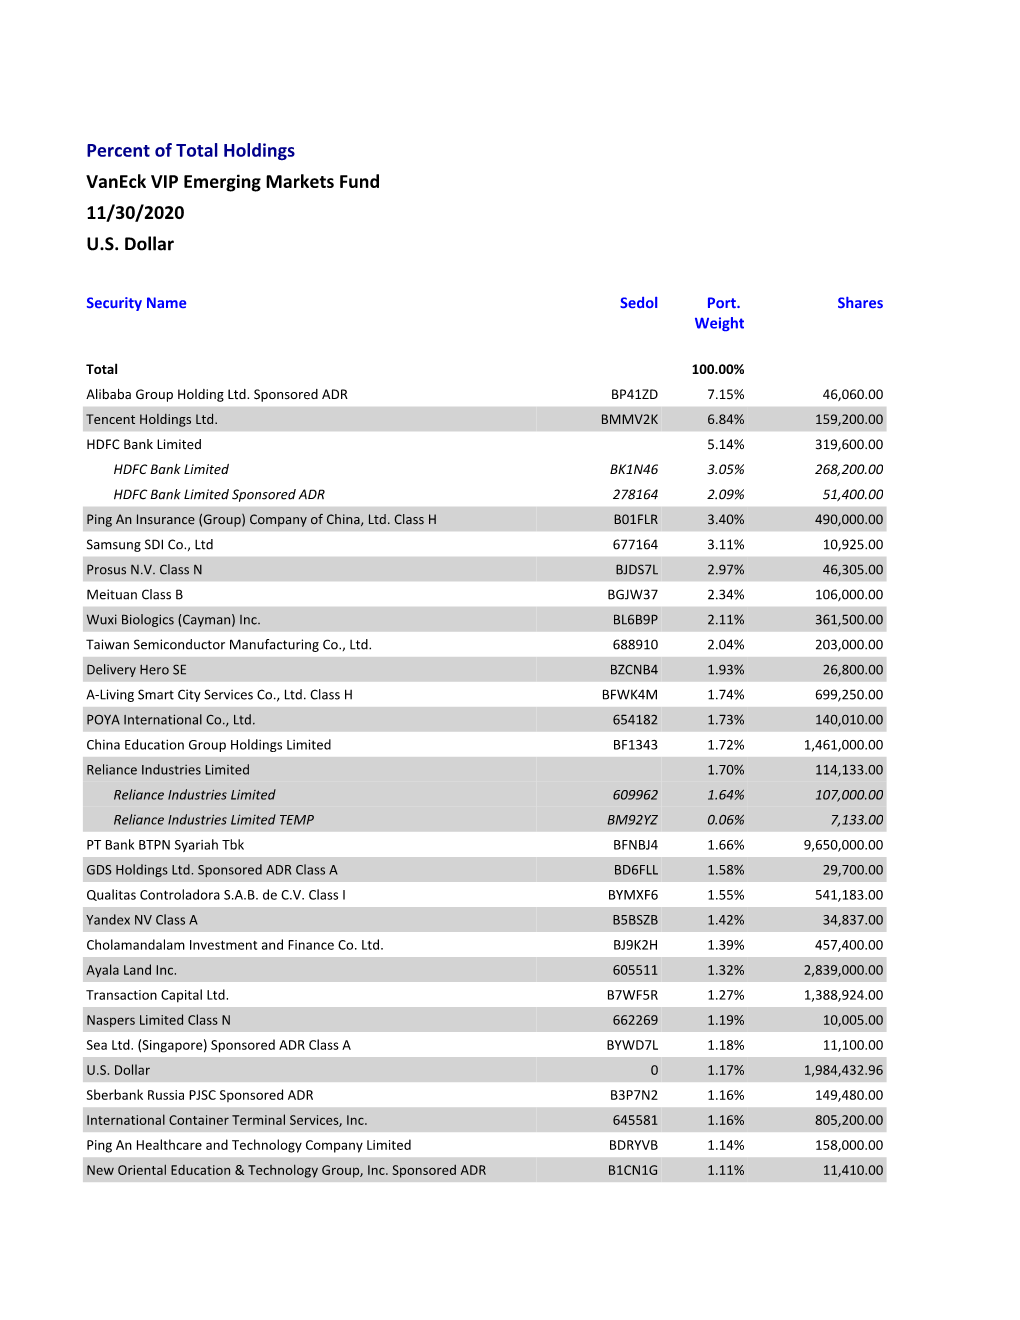 VIP Emerging Markets Fund Holdings